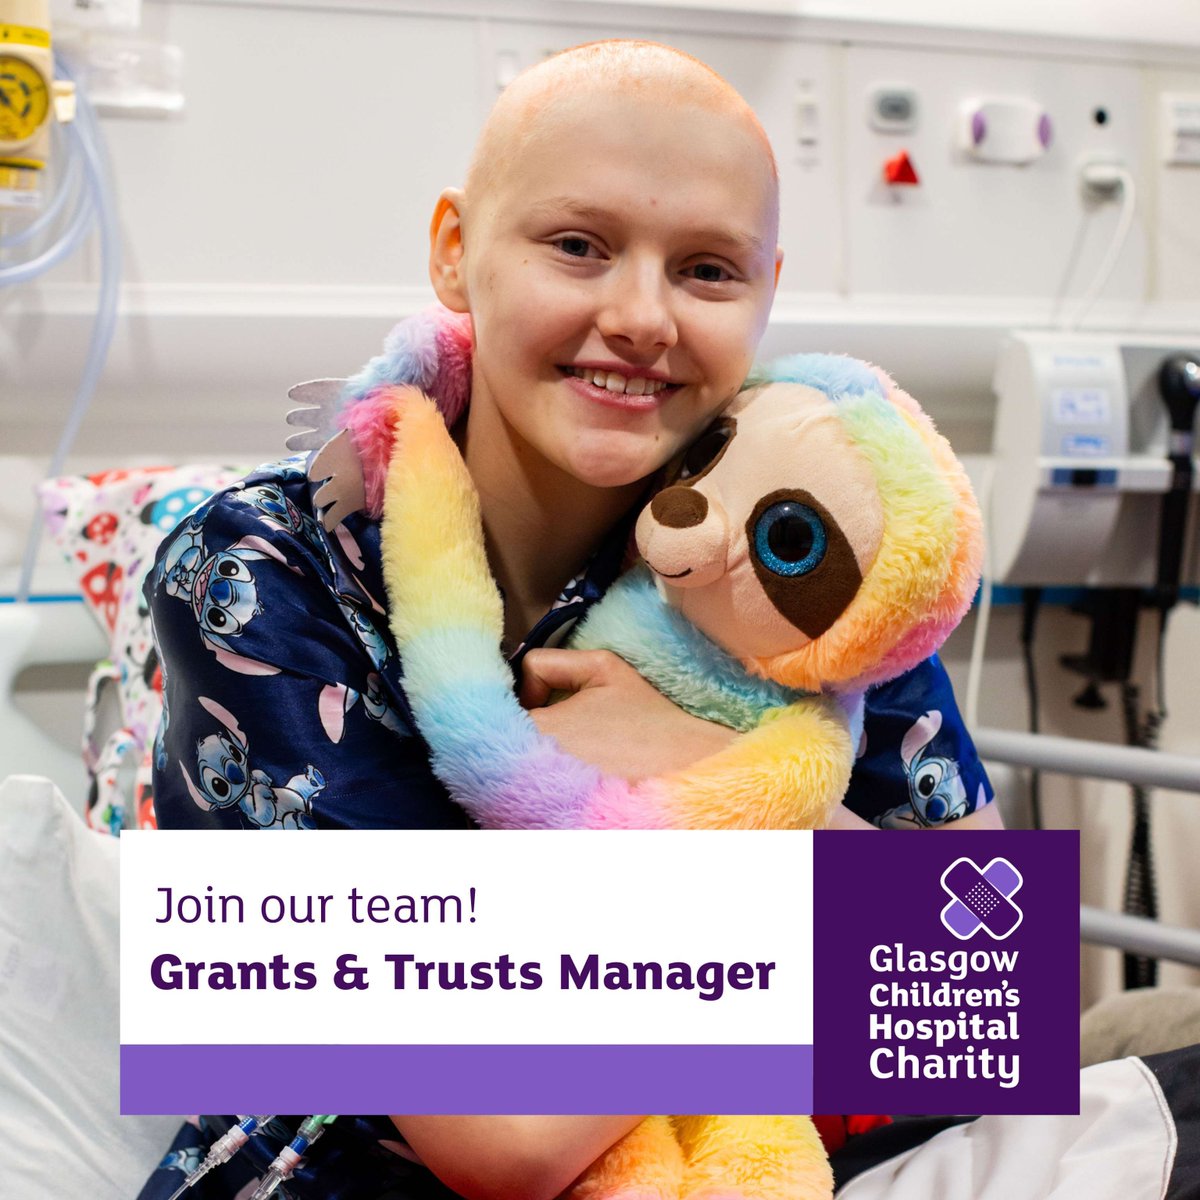 Join our team! 💜 Job Vacancy: Grants and Trusts Manager | £28,000 - £36,000 DOE Click here for more details about the role and how to apply👉bit.ly/GRANTS_AND_TRU… Applications will close on Monday 29 April at 5pm 🚨